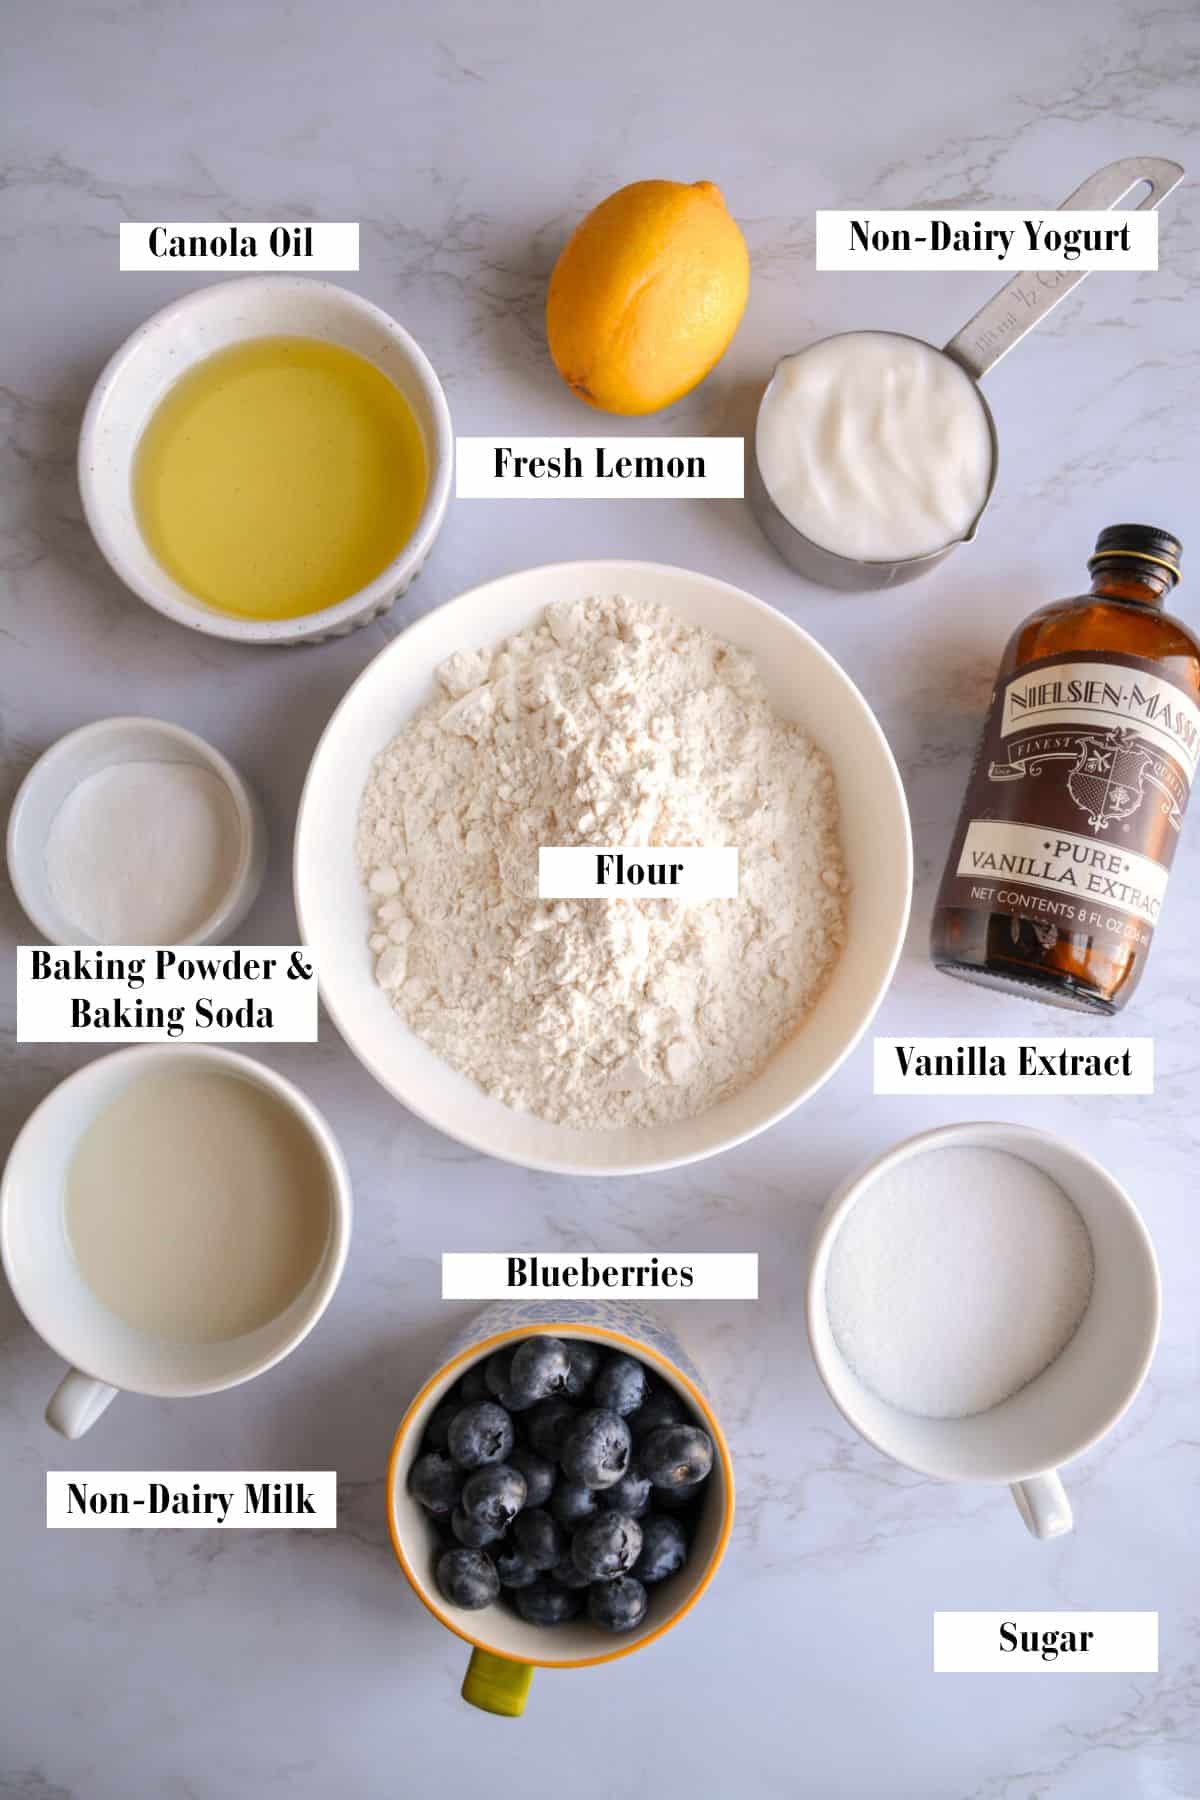 The ingredients needed to make this recipe in bowls on a marble surface.